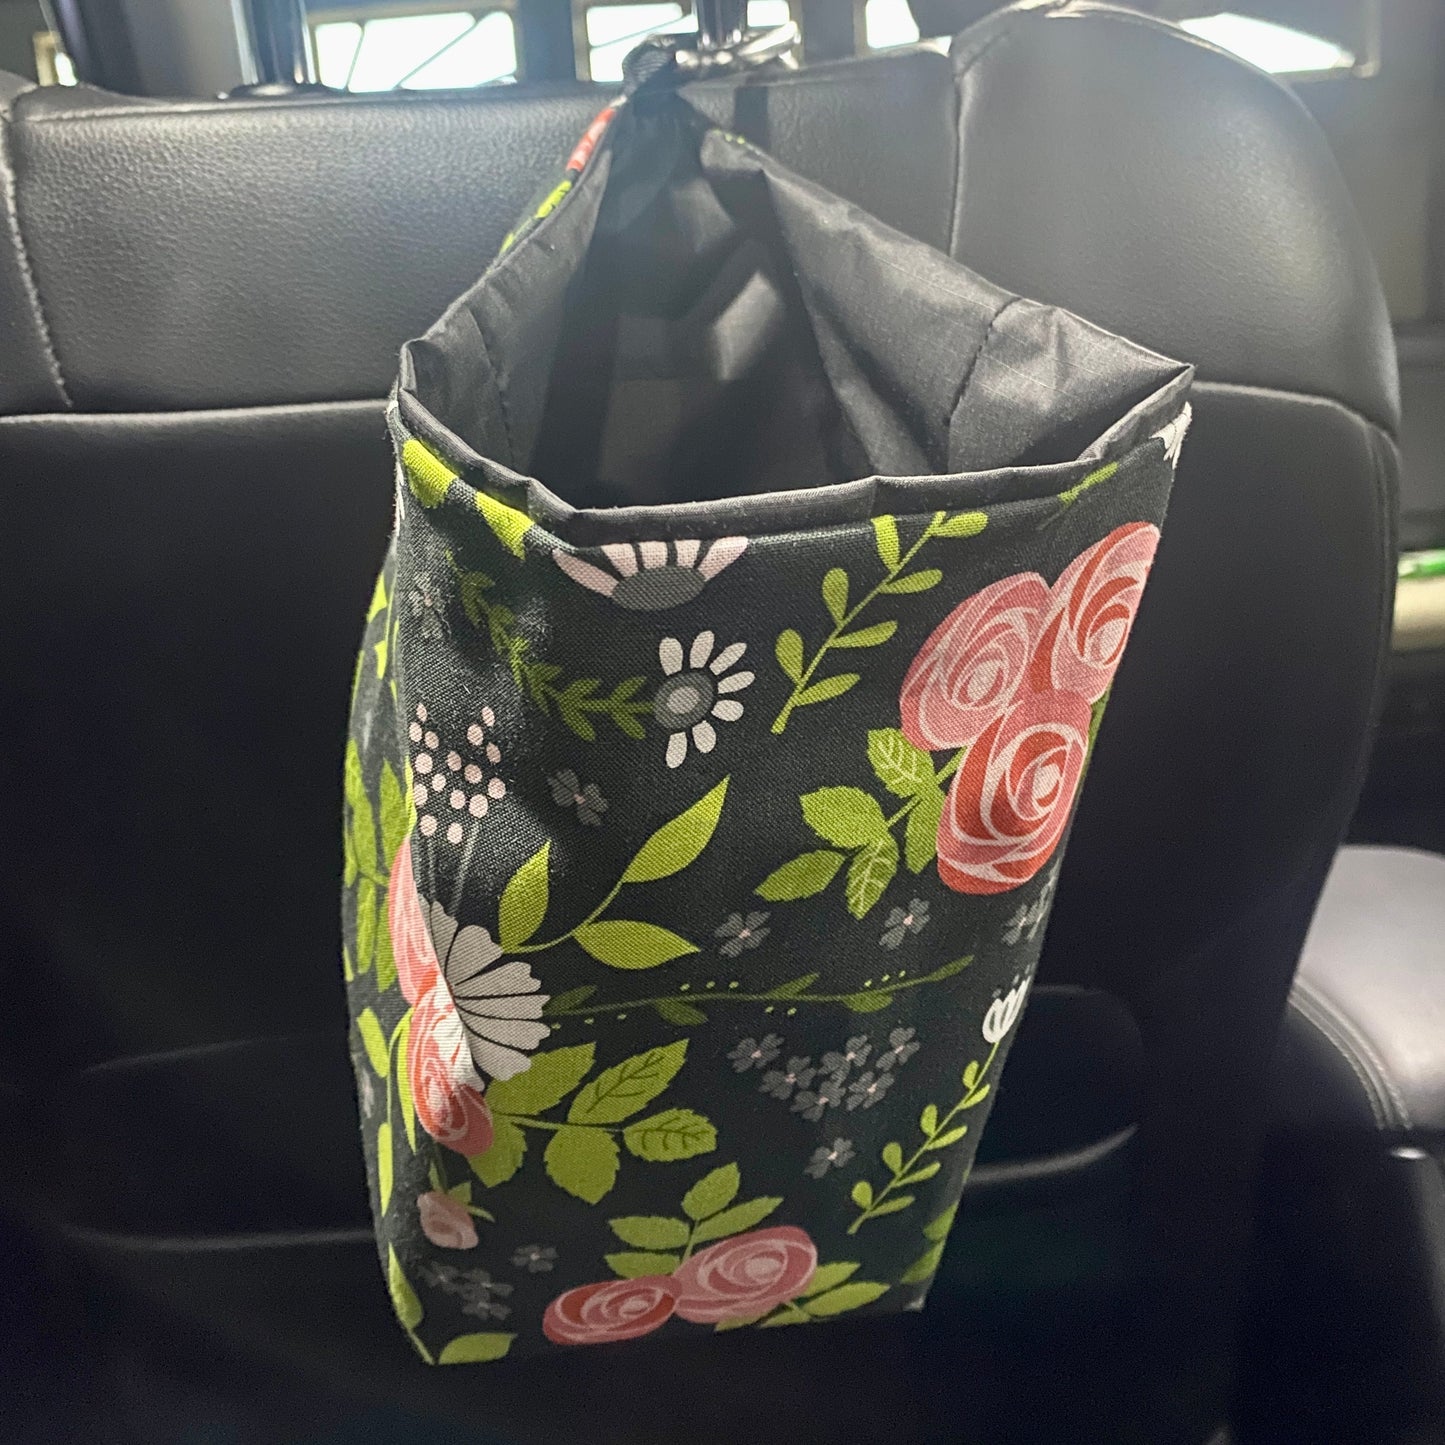 Car Trashie/Tissue Holder Black with Gray Cats